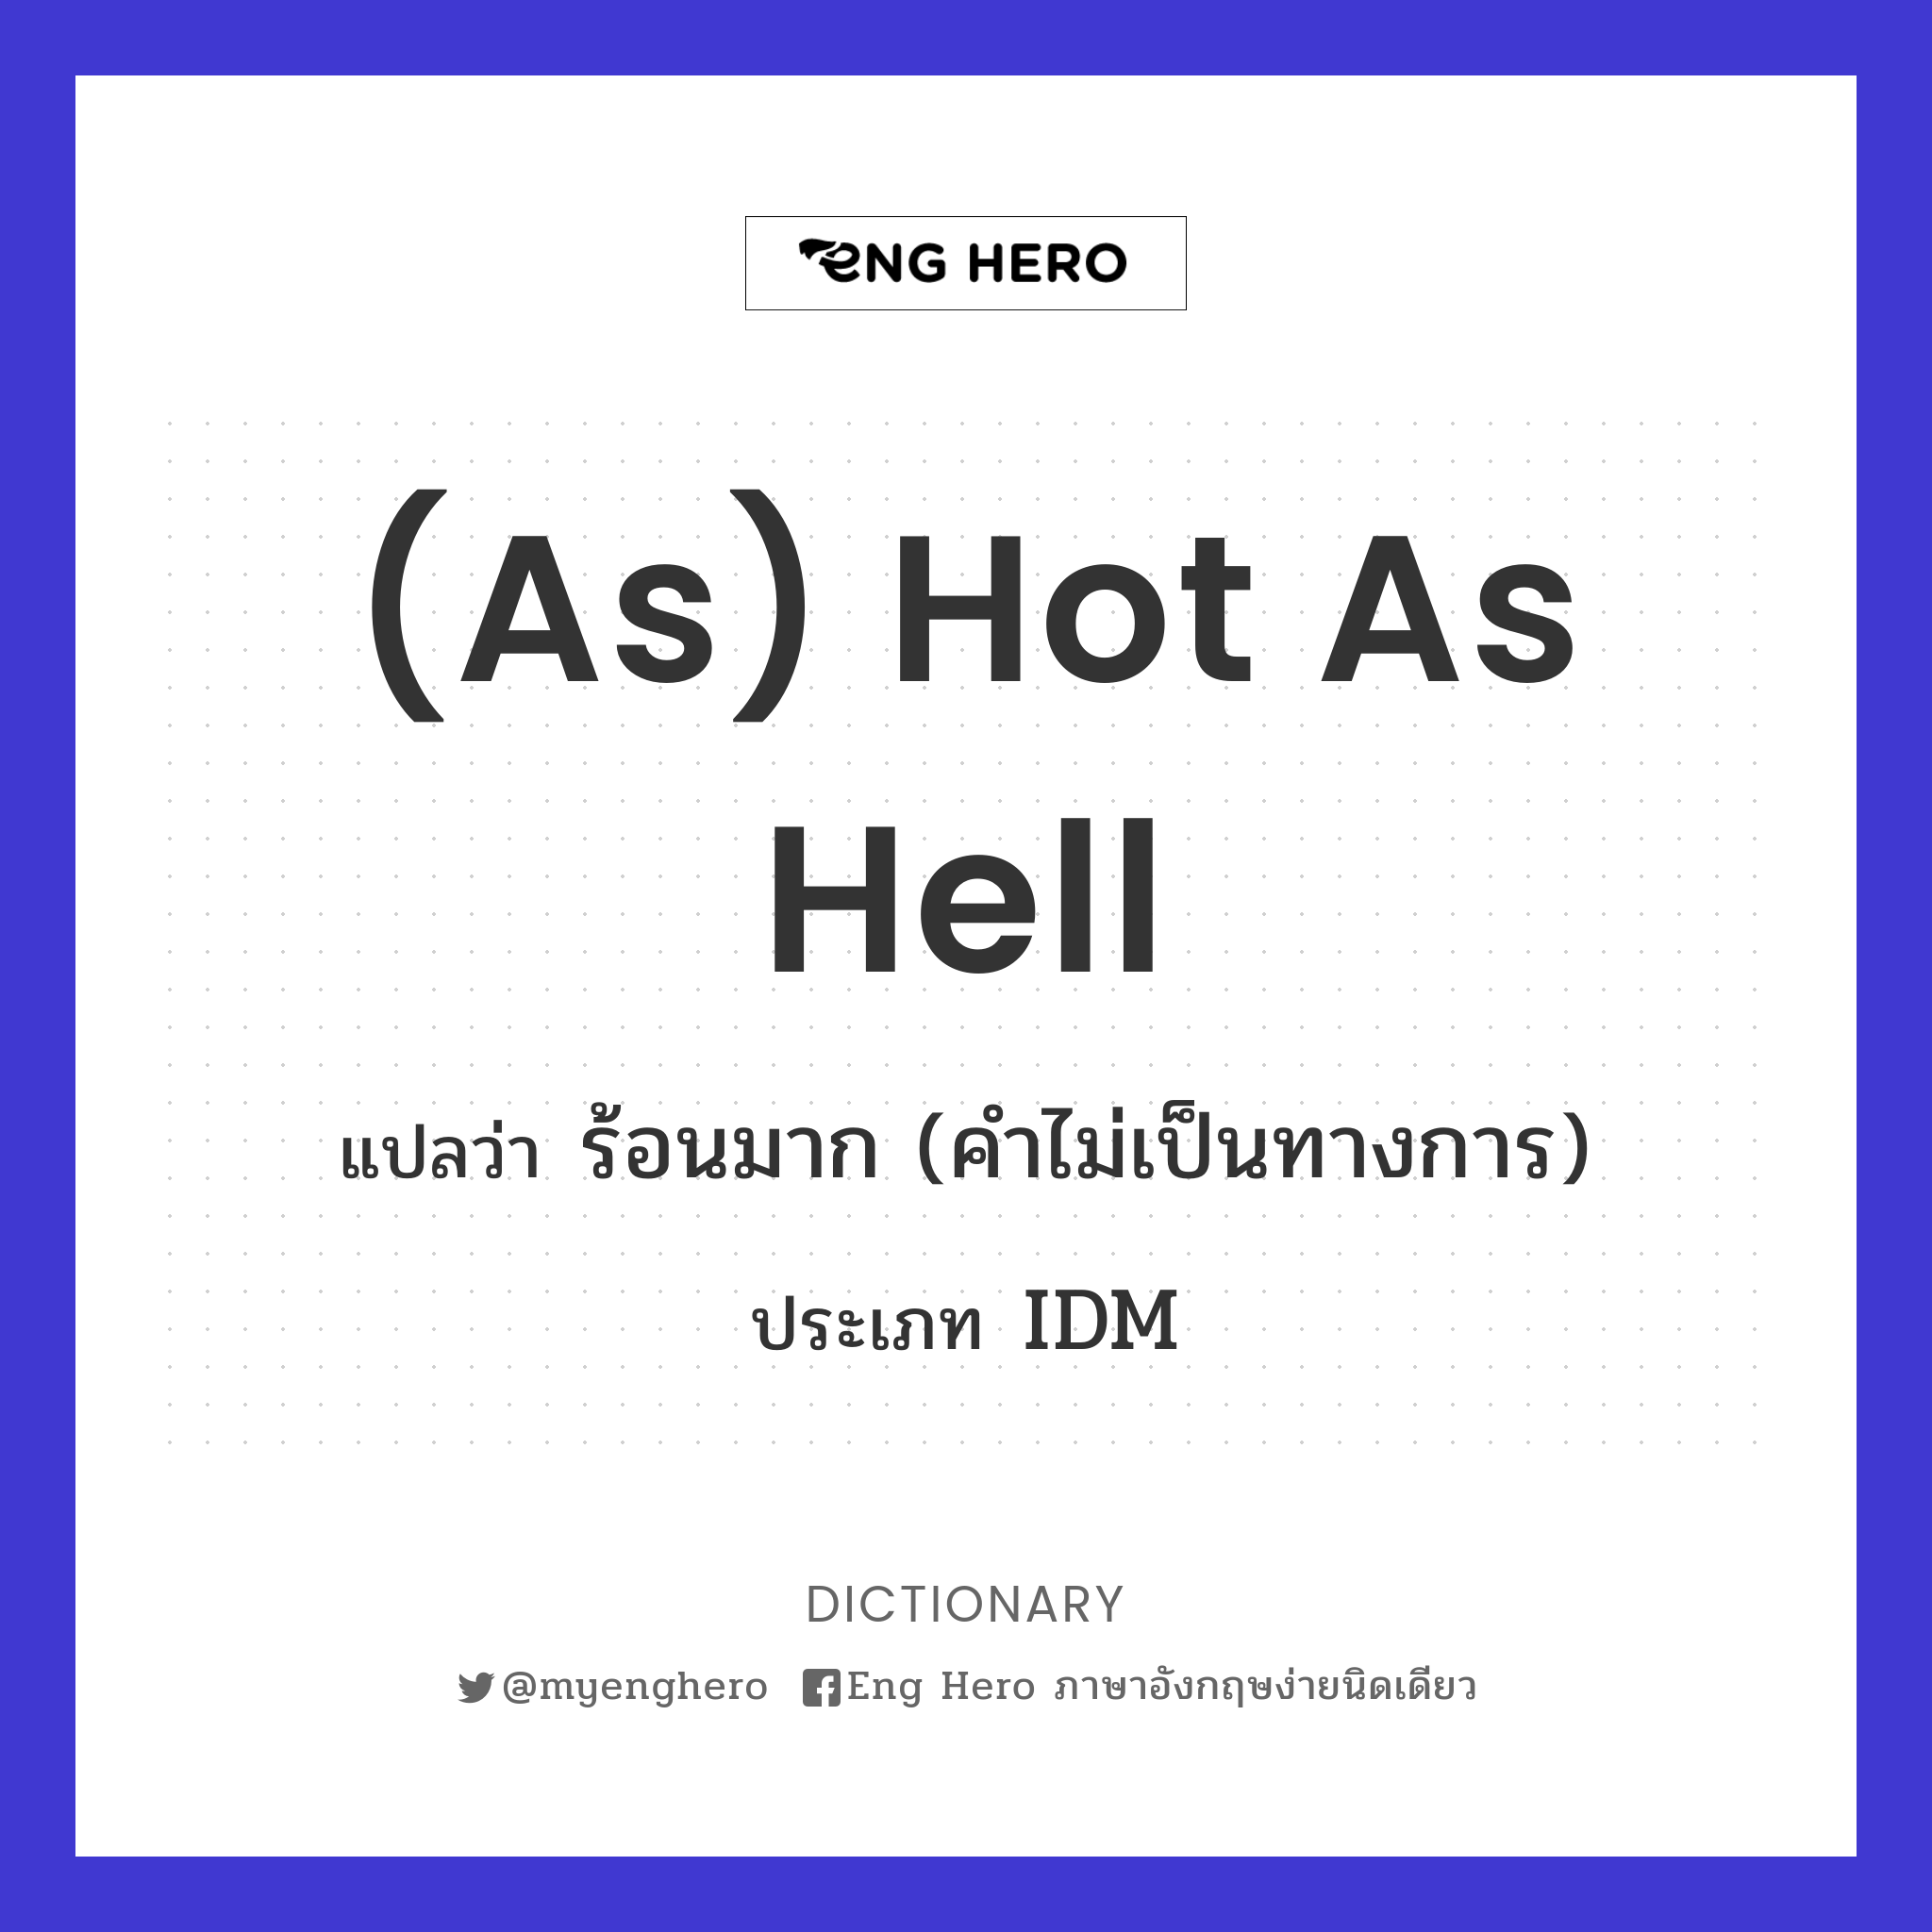 (as) hot as hell